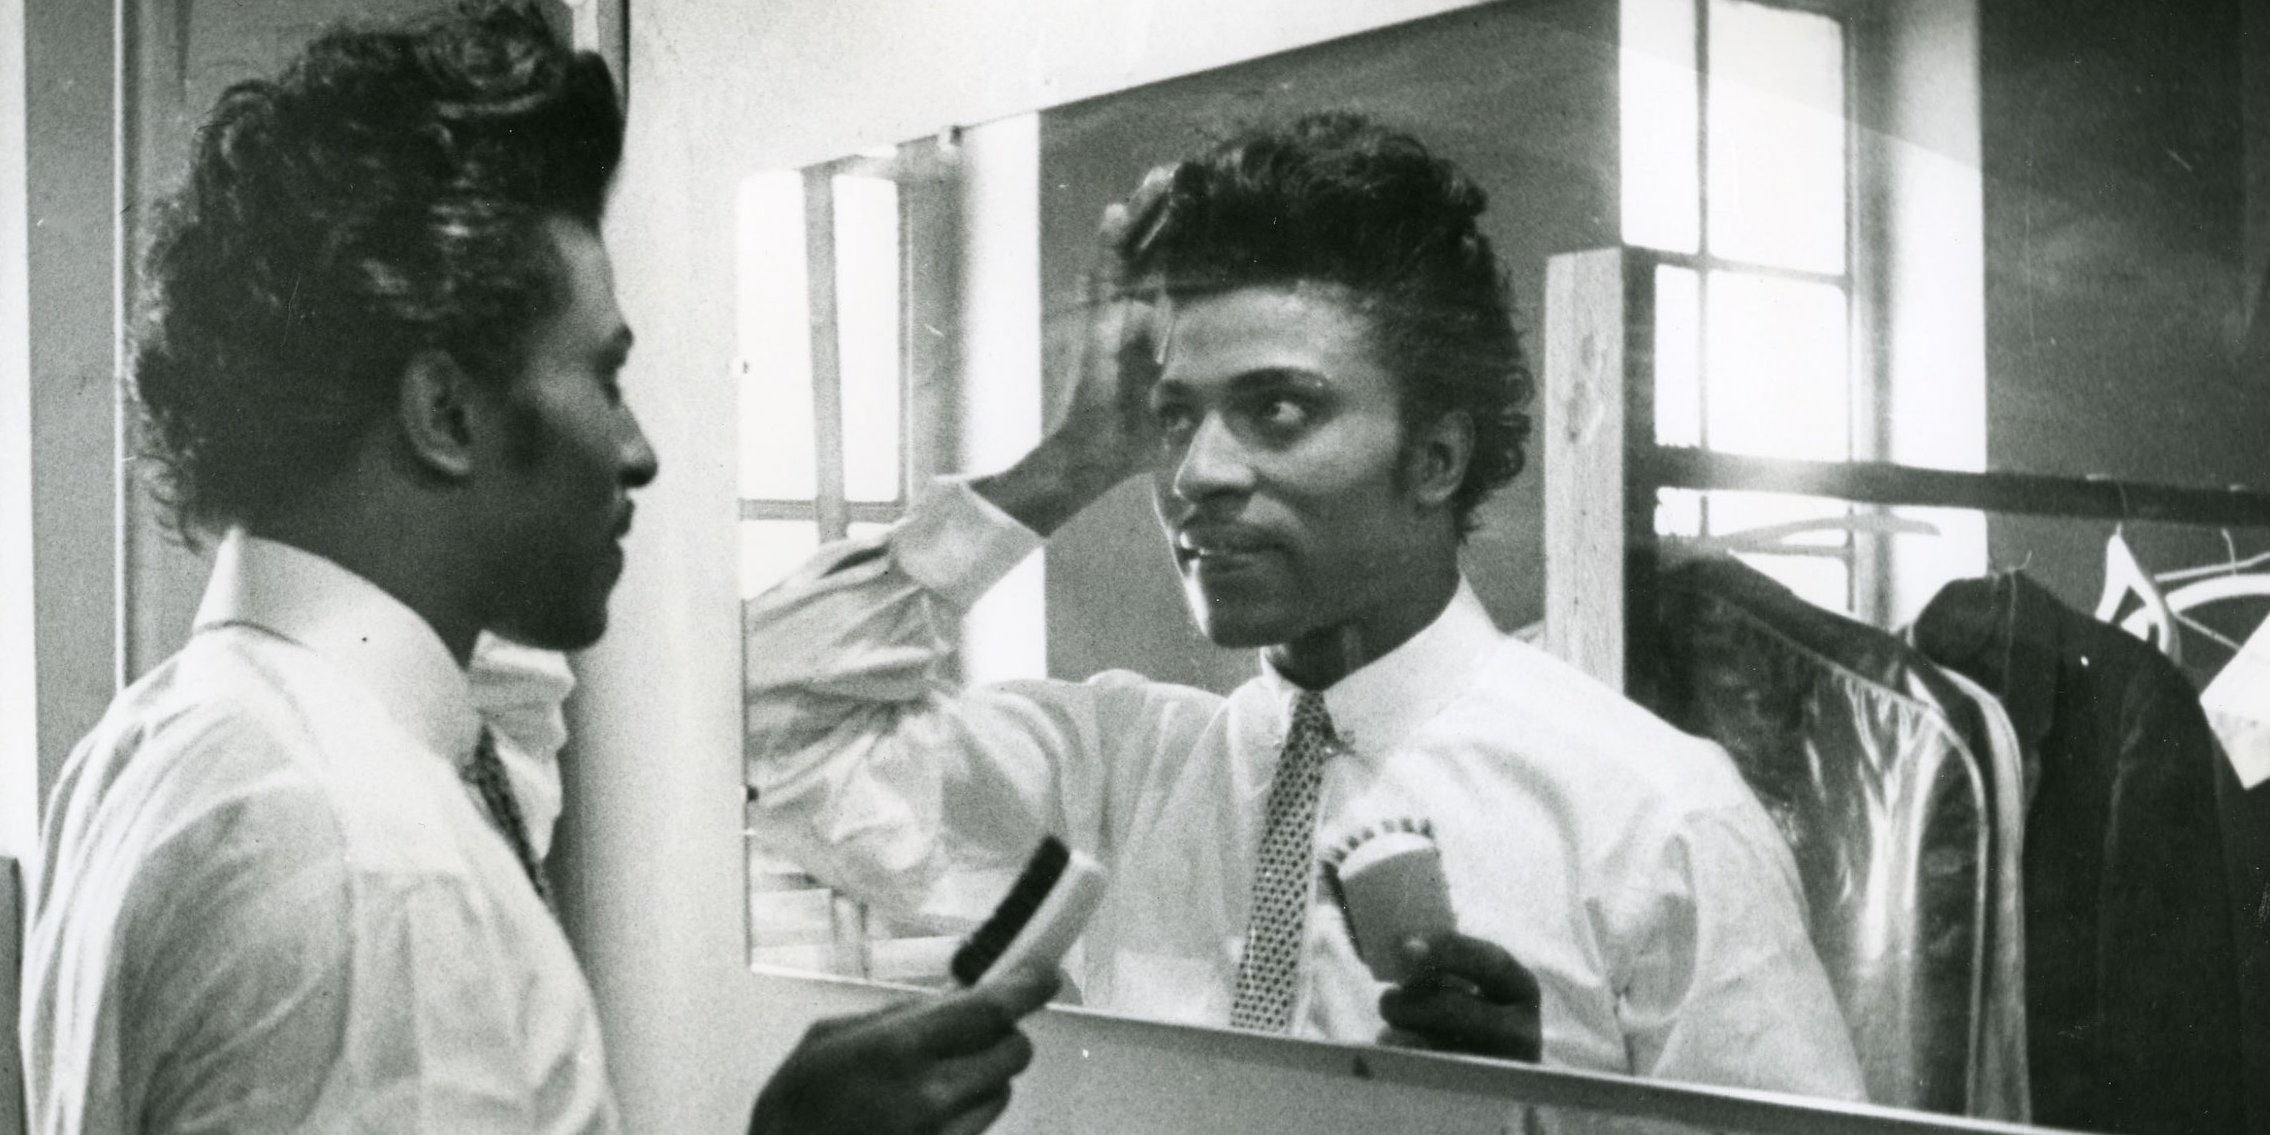 Little Richard fixing his hair in a mirror in 1956